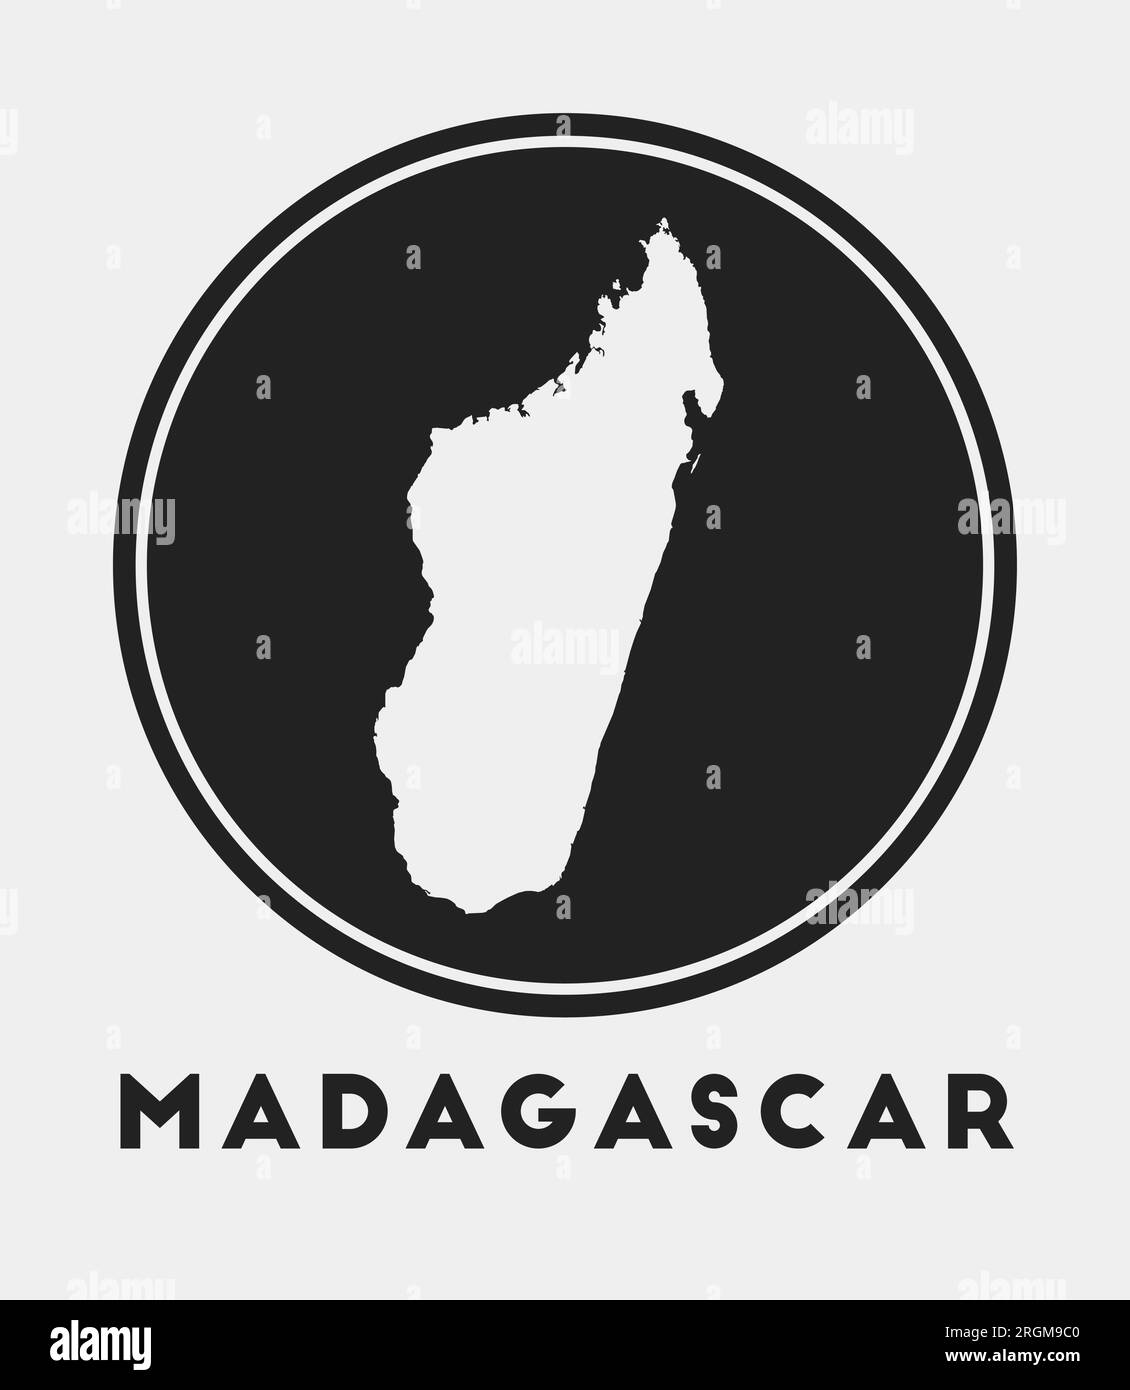 Madagascar icon. Round logo with country map and title. Stylish Madagascar badge with map. Vector illustration. Stock Vector